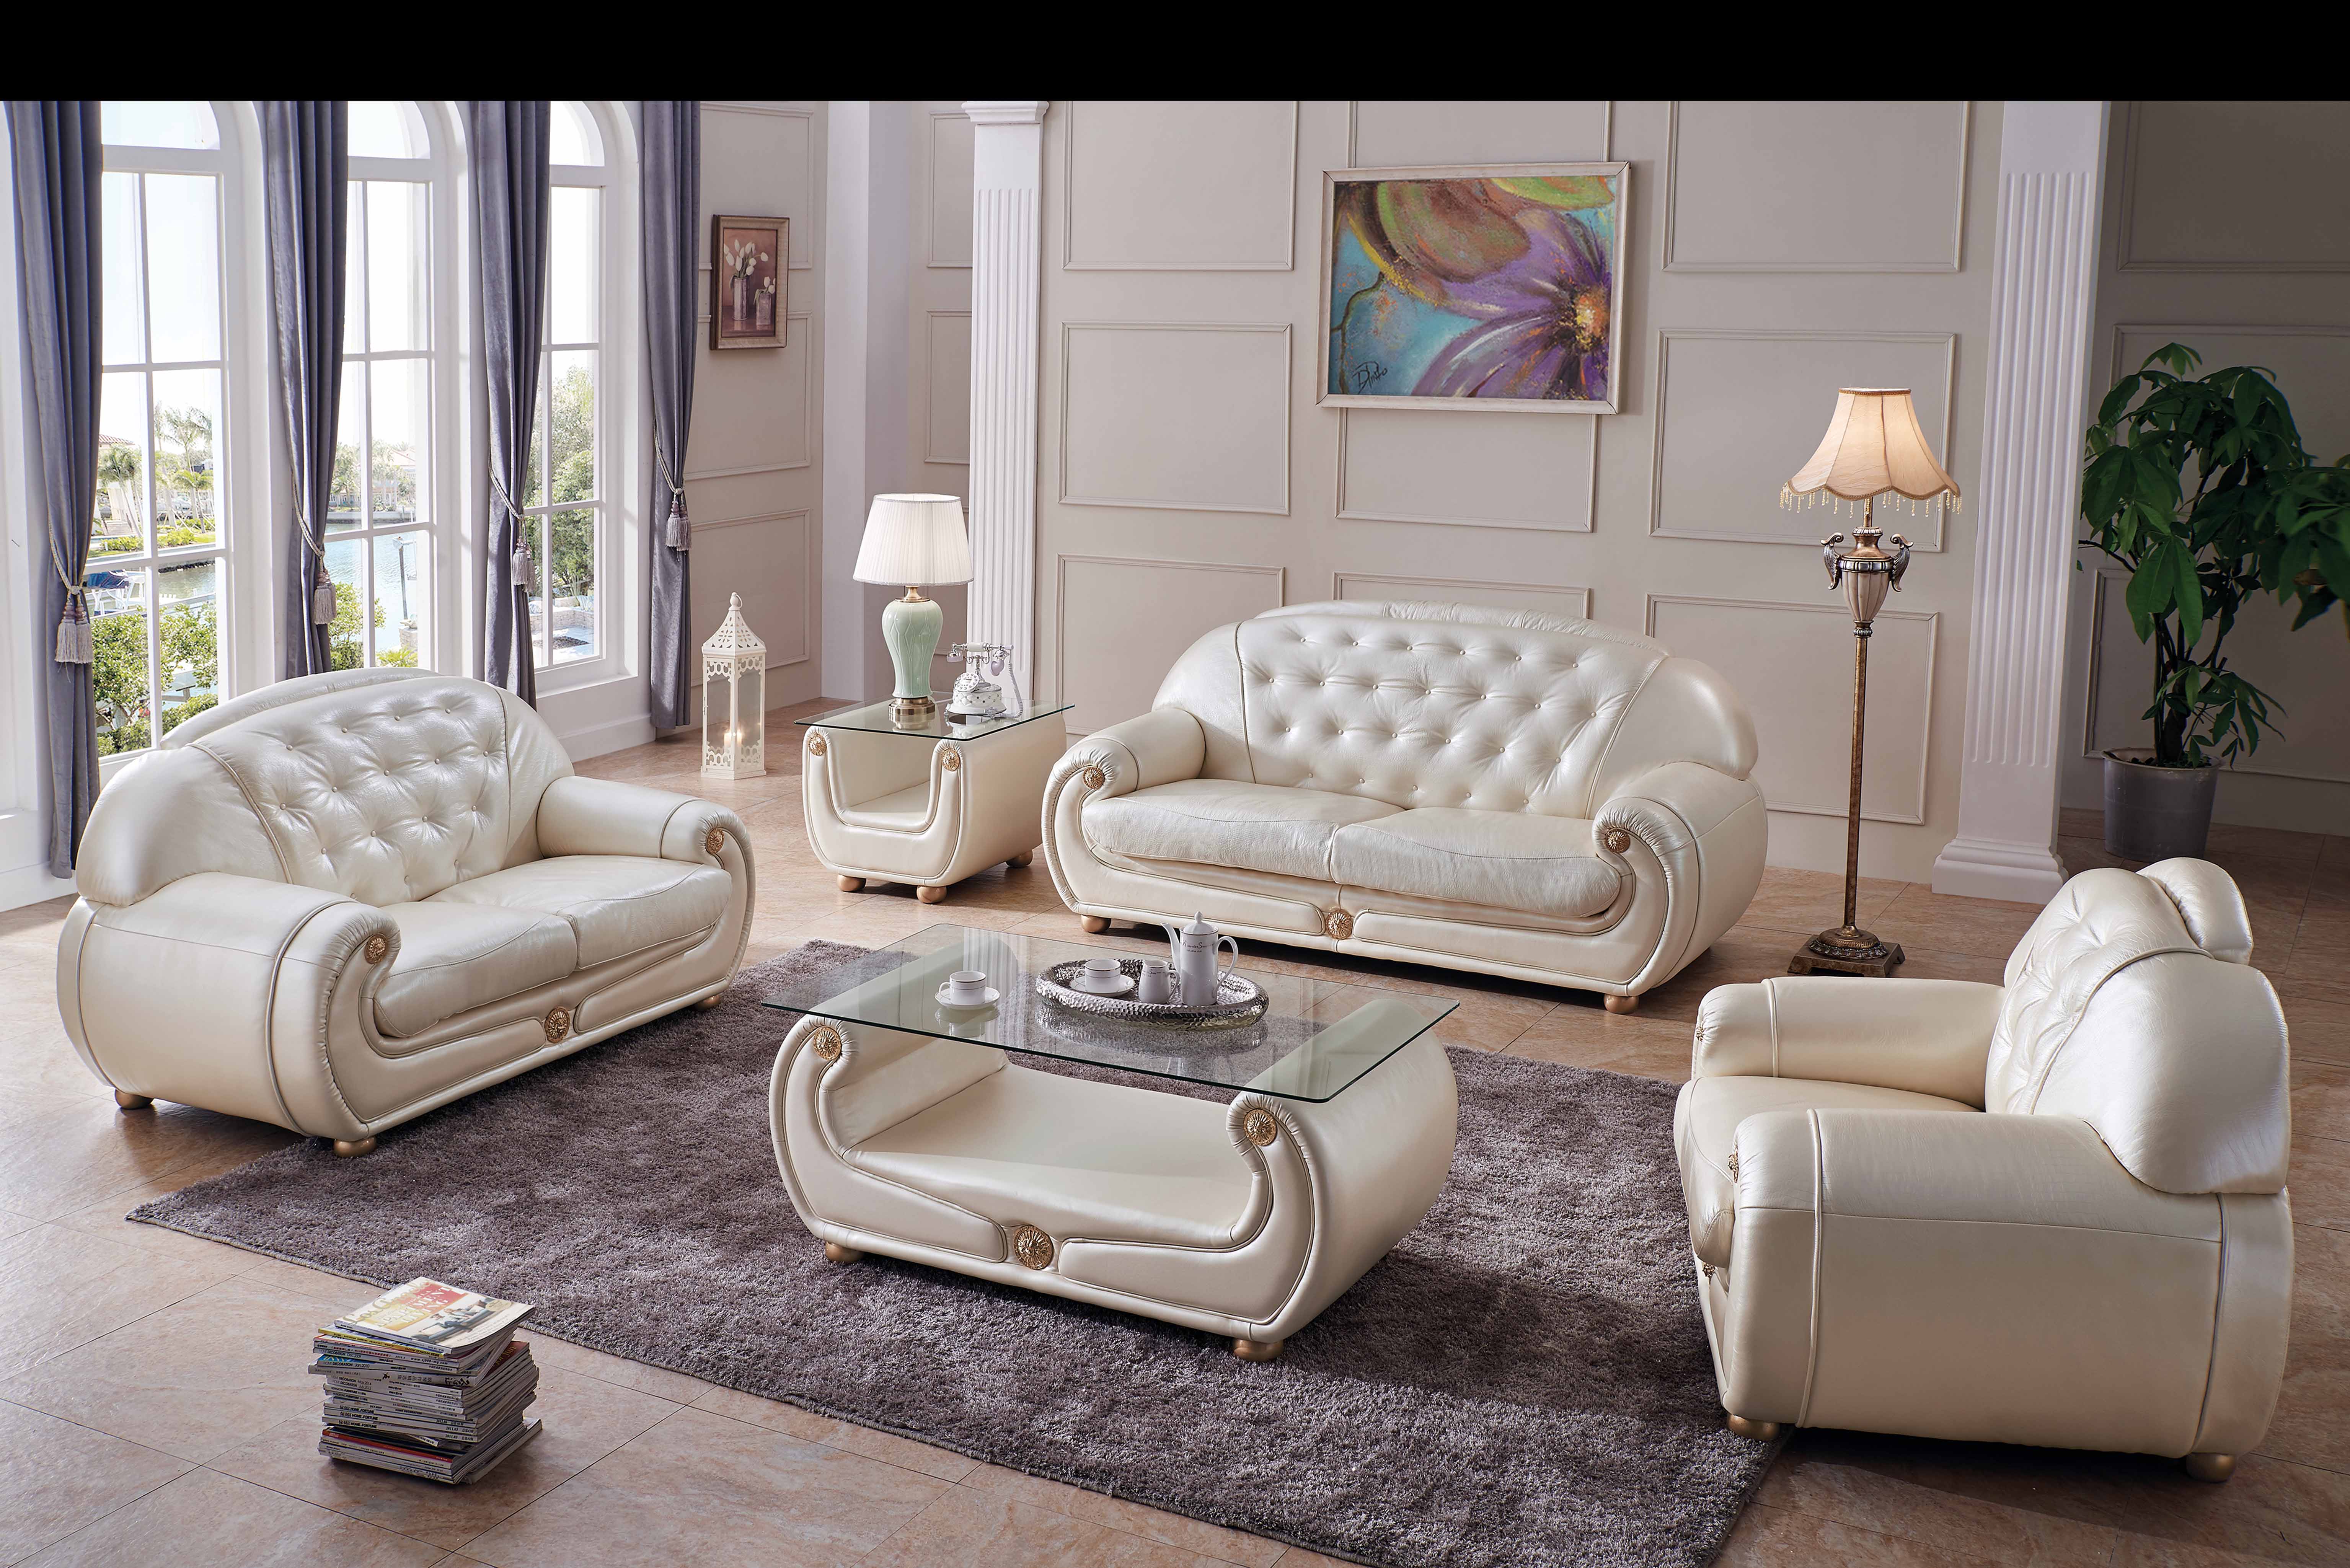 Giza Full Leather in Beige, Sofas Loveseats and Chairs, Living Room ...